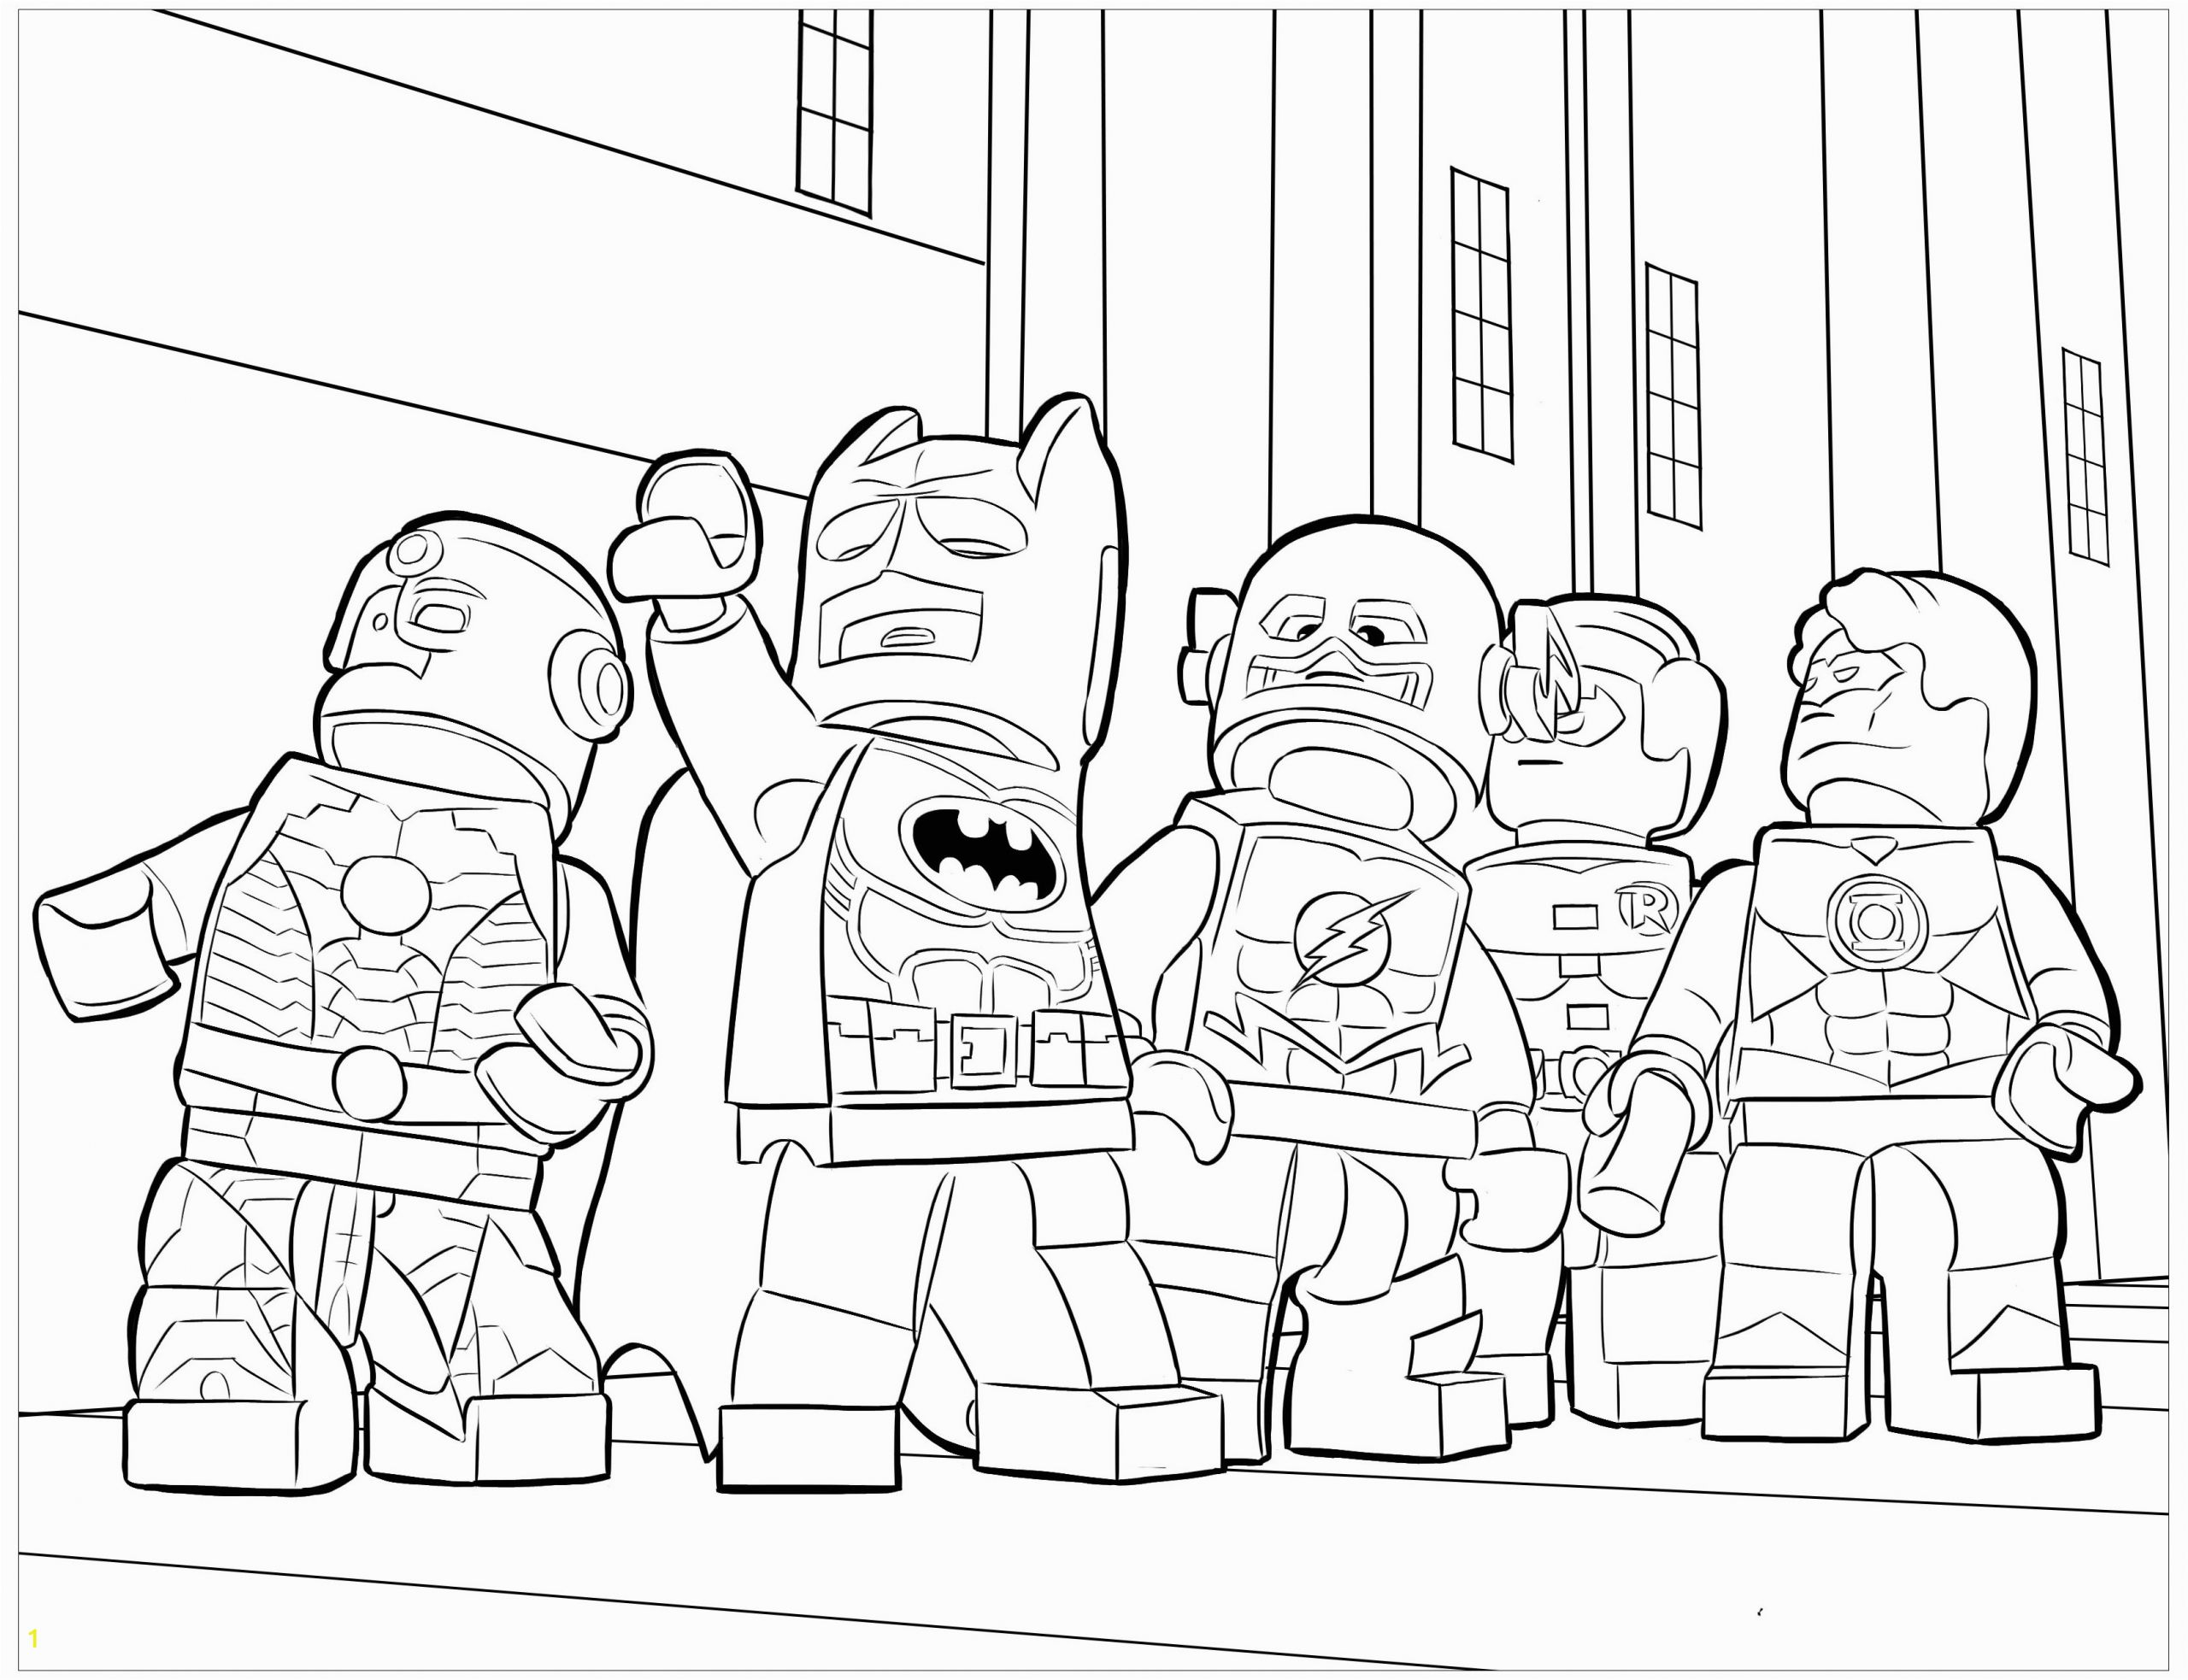 Free Printable Lego Batman Coloring Pages Lego Batman to Color for Kids Lego Batman Kids Coloring